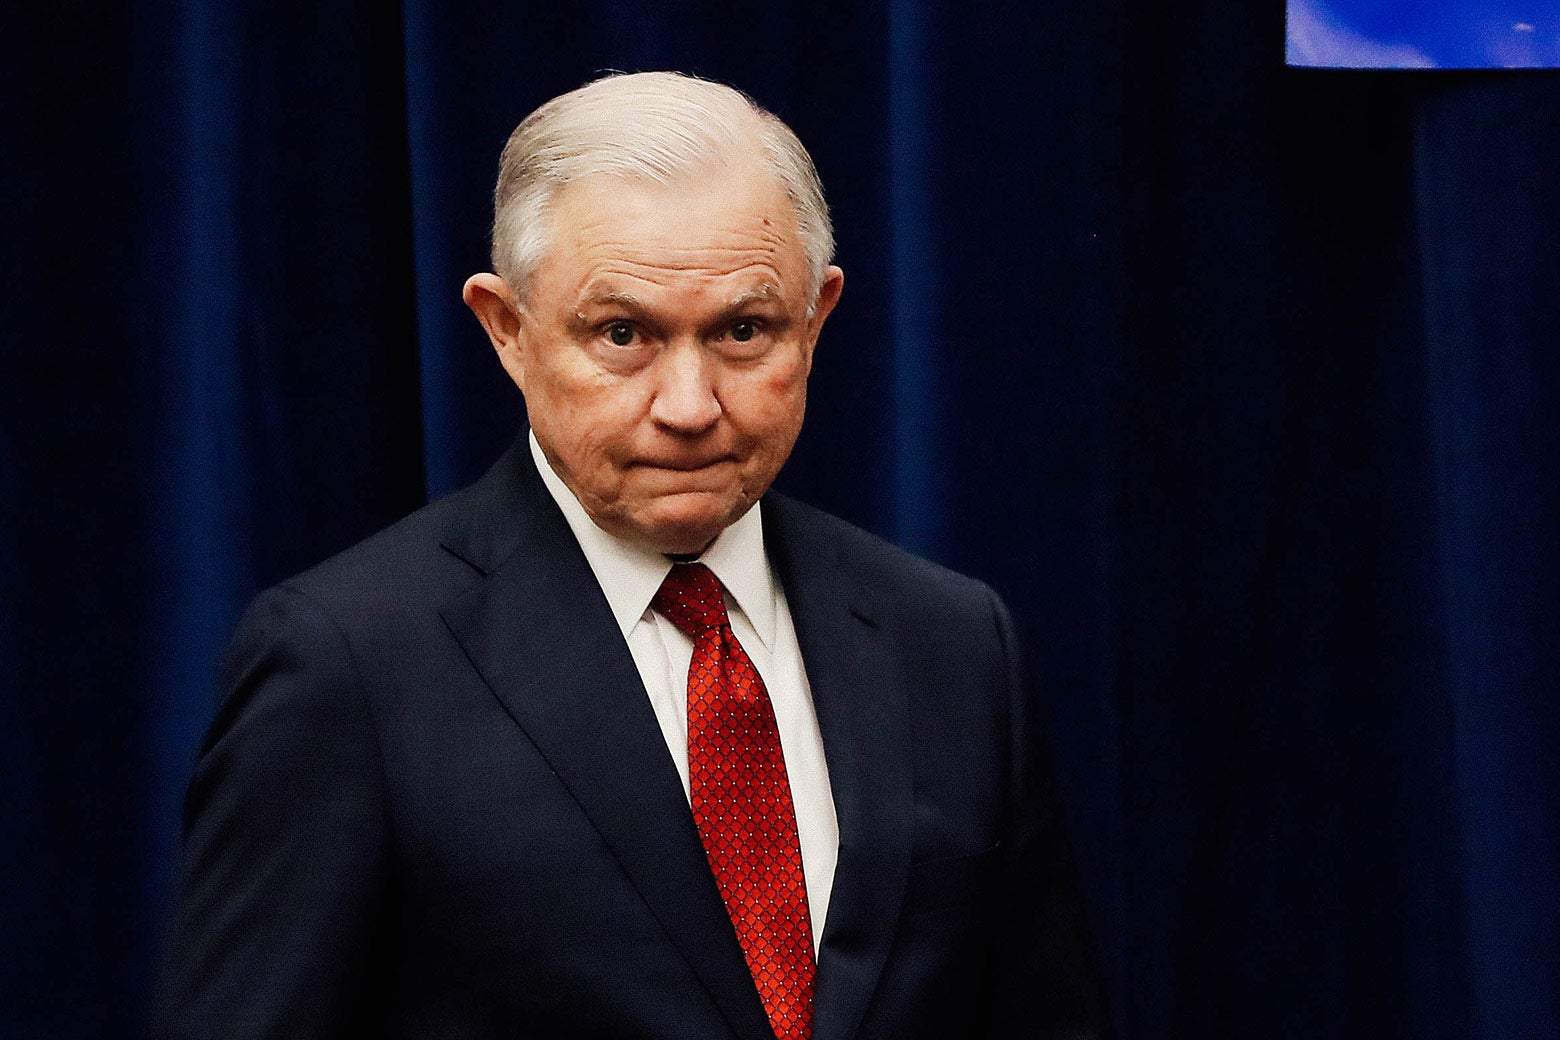 Attorney General Jeff Sessions is seen at the California Peace Officers' Association 26th Annual Law Enforcement Legislative Day on March 7, 2018 in Sacramento, California.